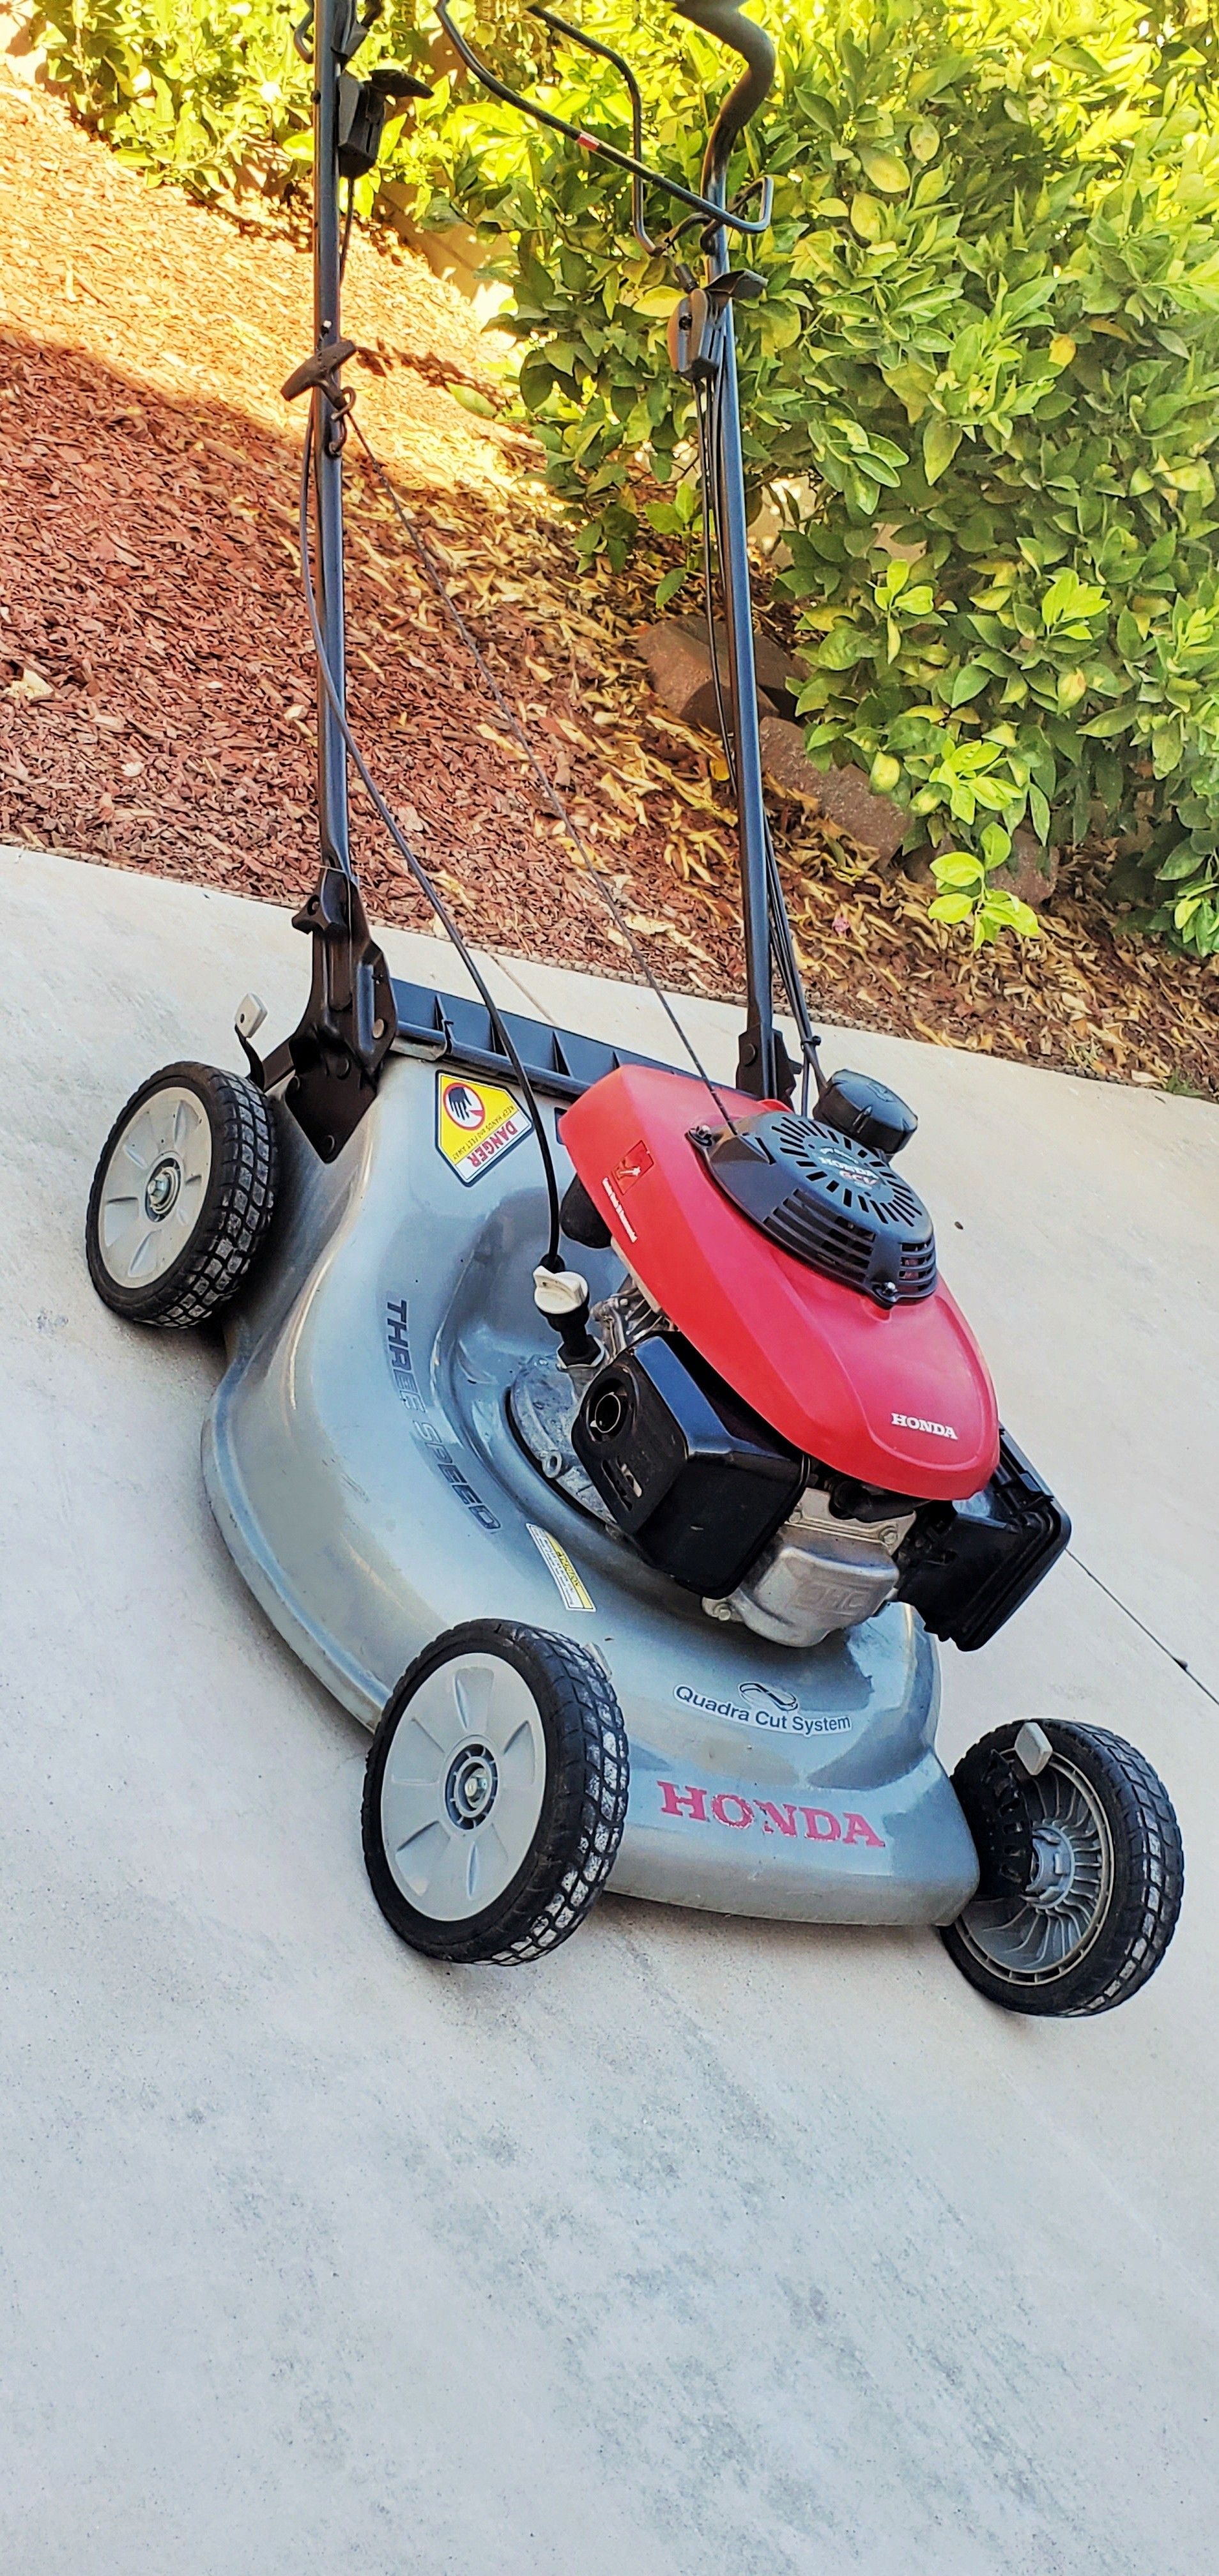 Commercial grade Honda OVH Gas Powered Self-Propelled Lawn Mower